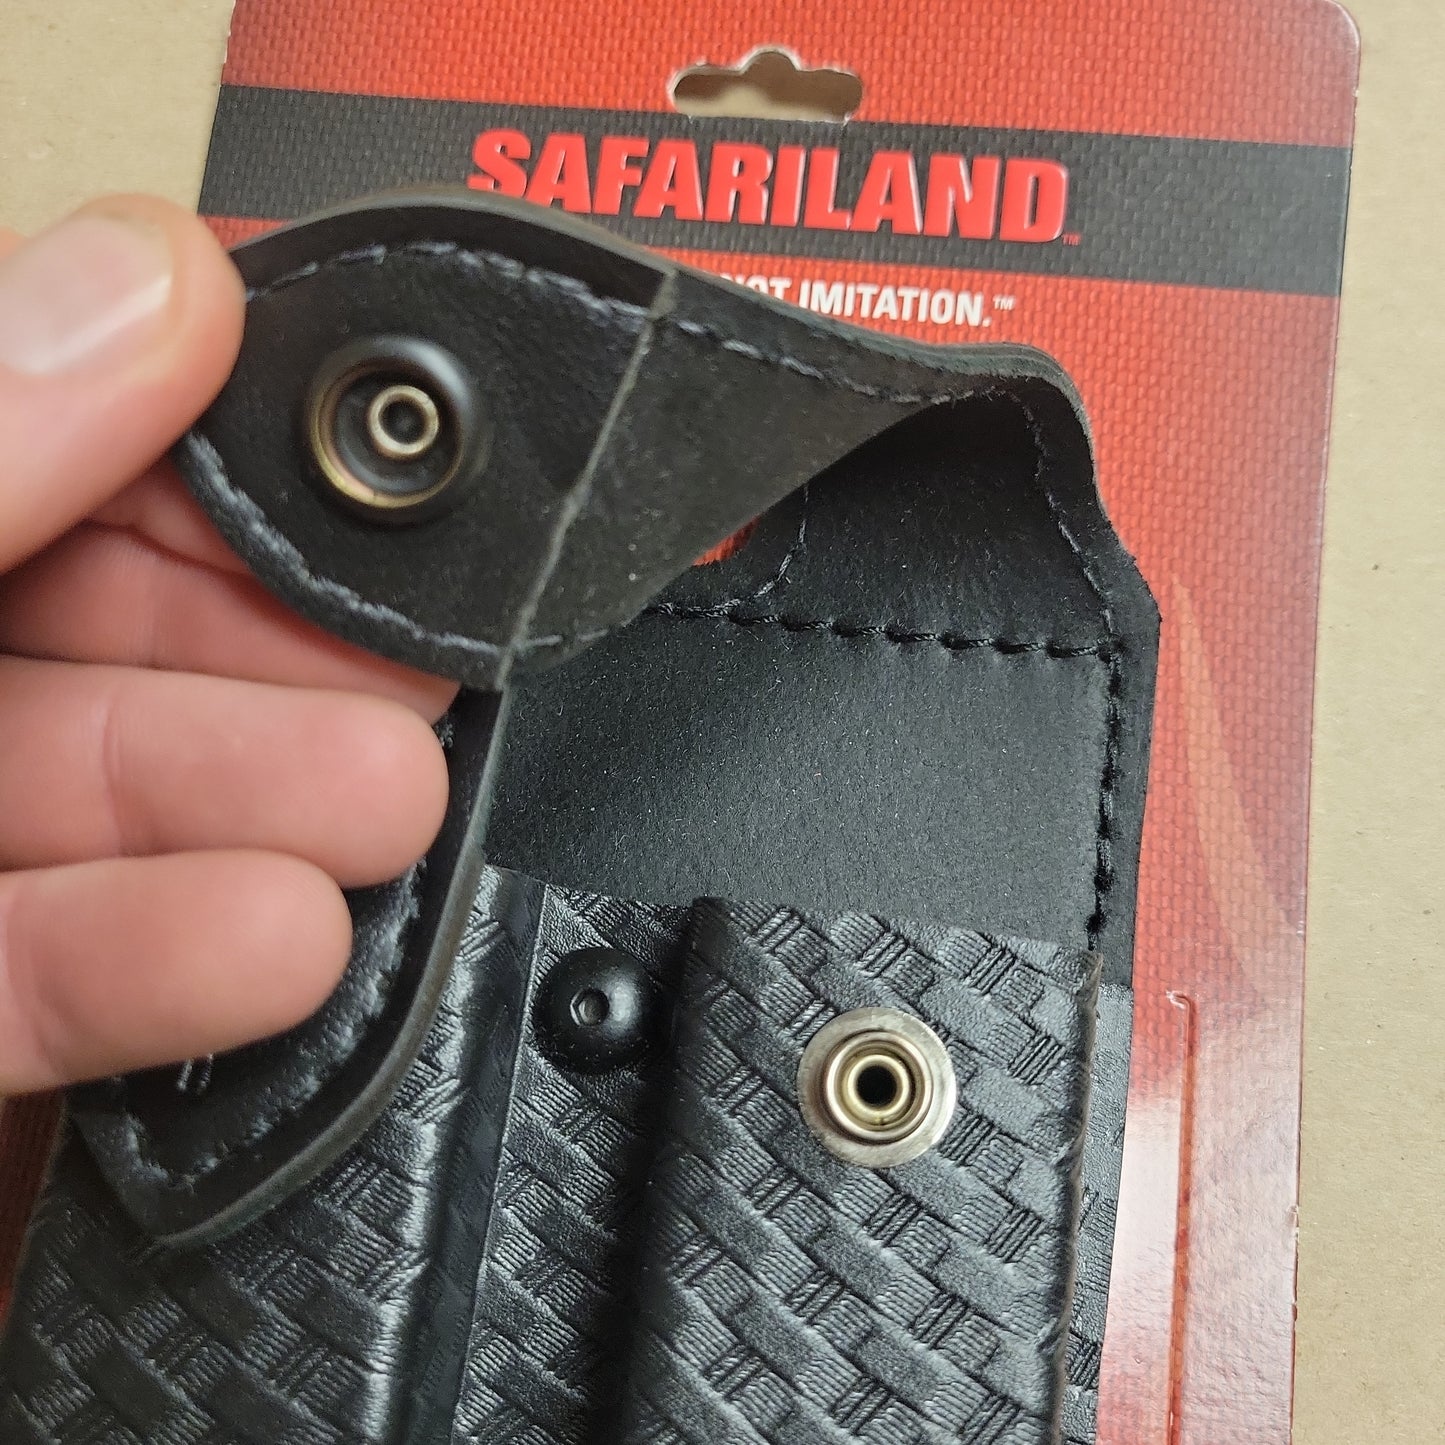 Safariland Double Mag Holder Basetweave STX Hidden Snap for S&W M&P 45 77-419-48HS